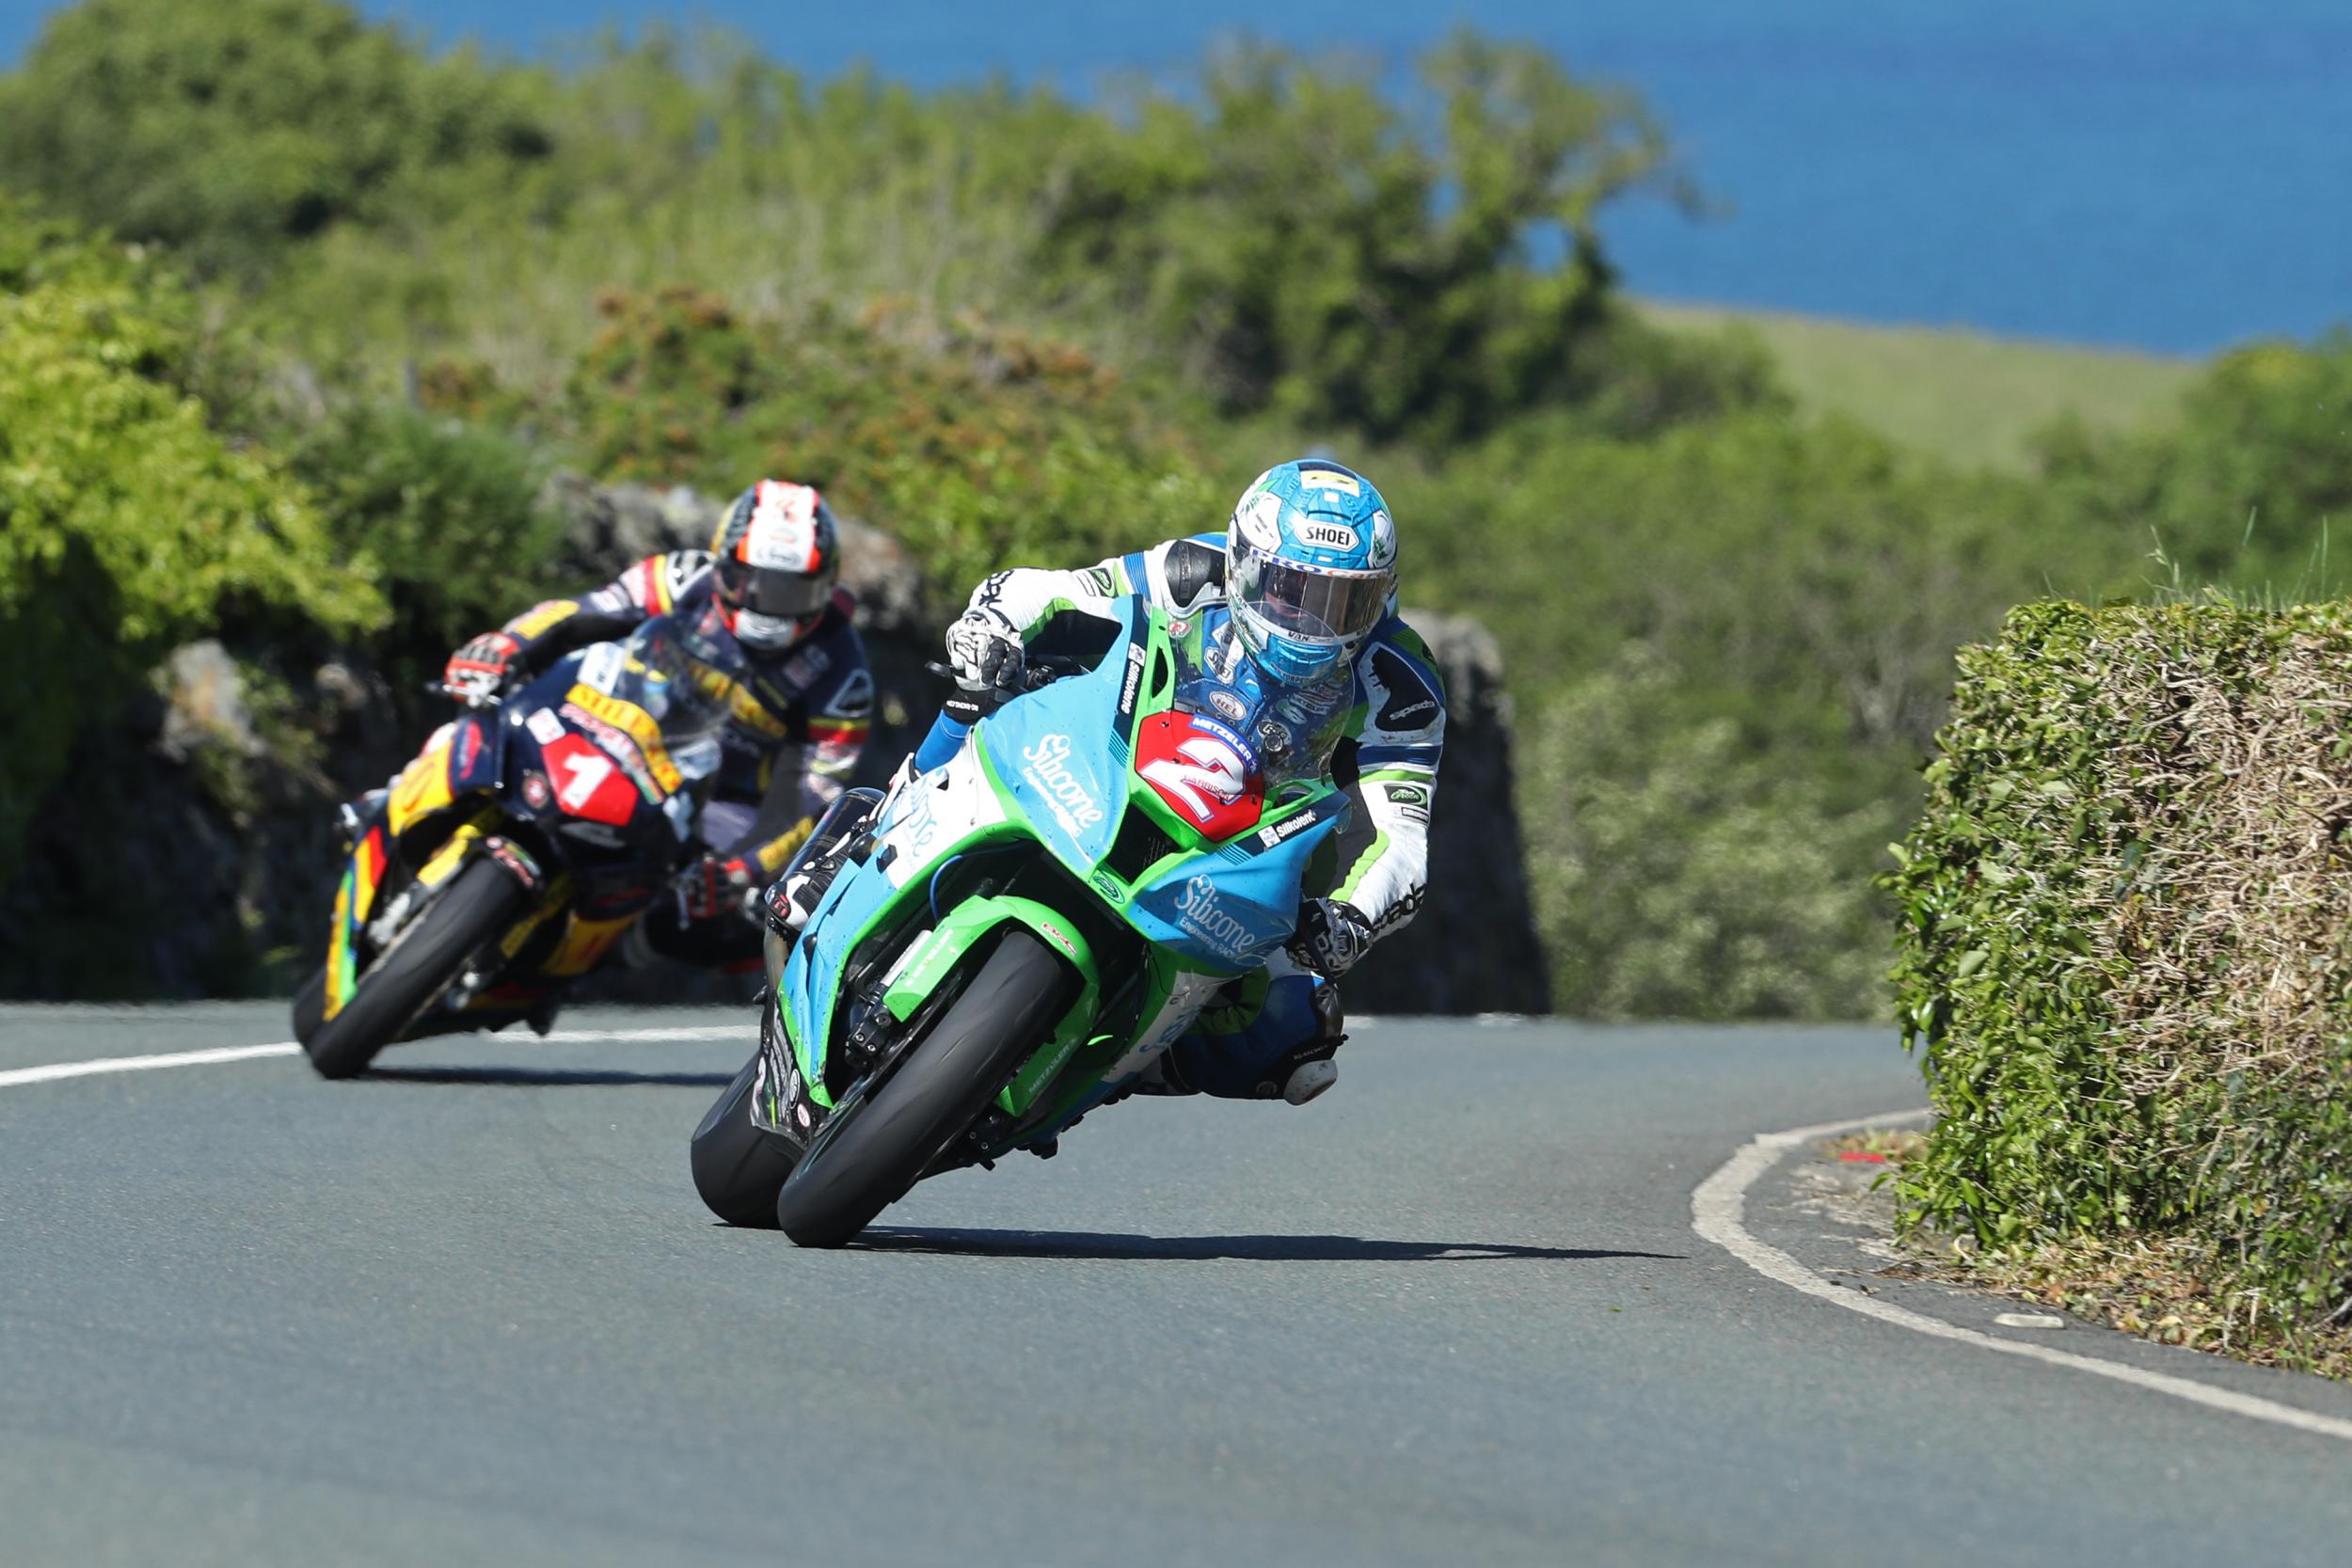 Harrison took victory in the Senior TT (www.iomttraces.com)